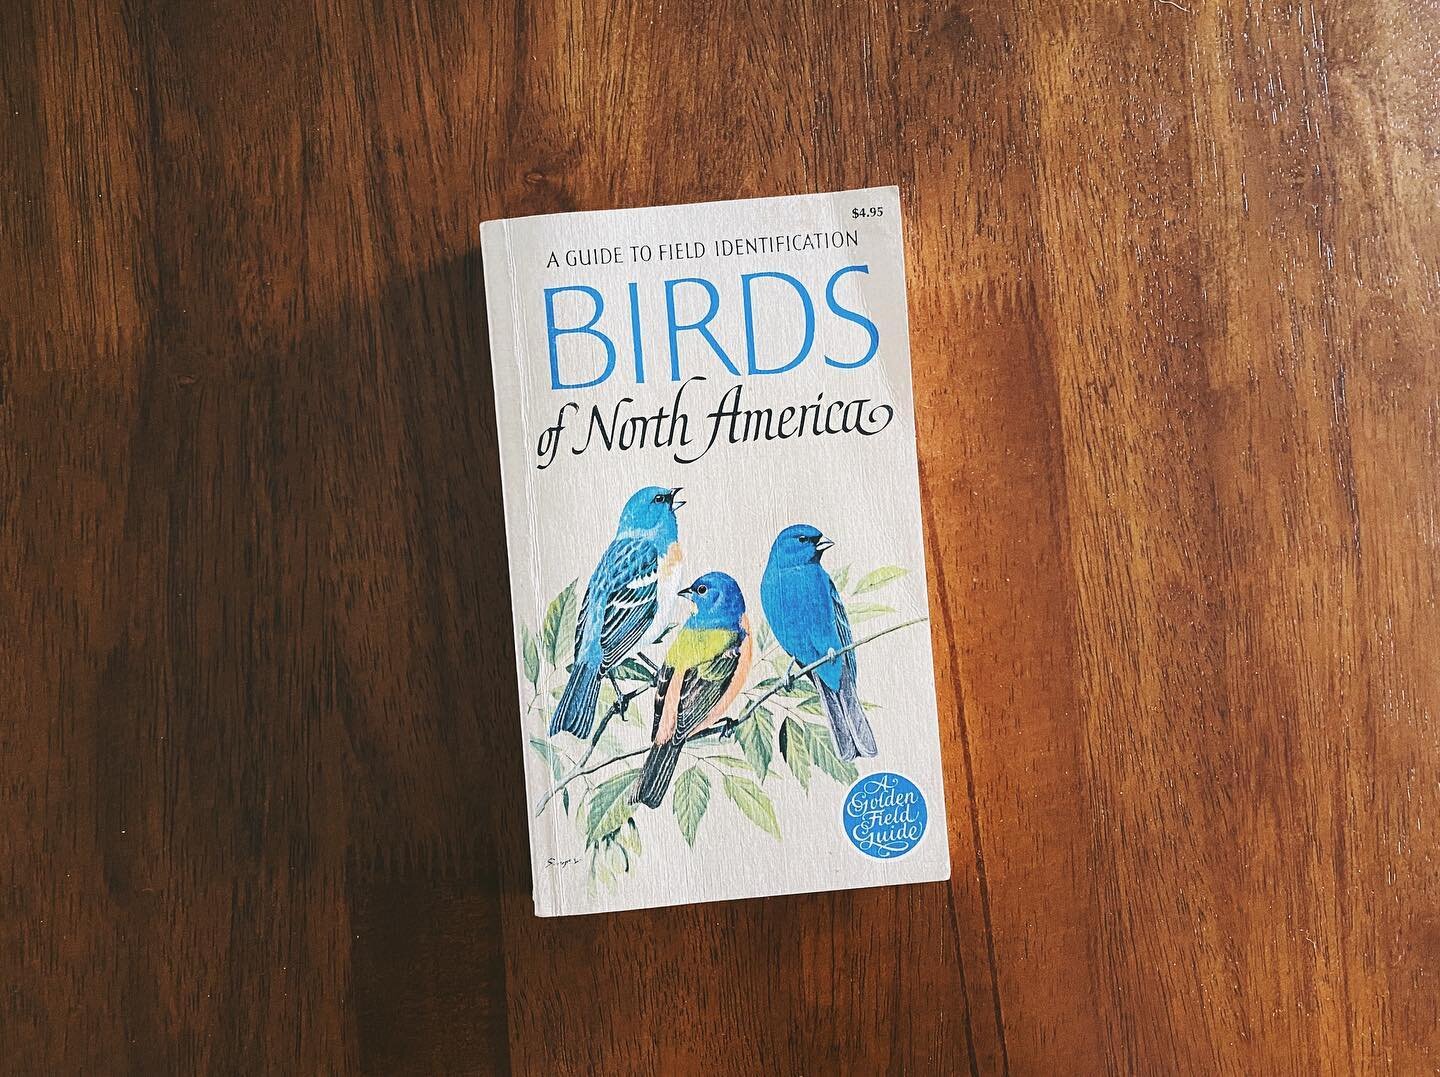 Just pulled this off the shelf to ID a bird at the feeder&mdash;my grandpa&rsquo;s bird book from 1966. I spent a whole childhood looking at these illustrations.